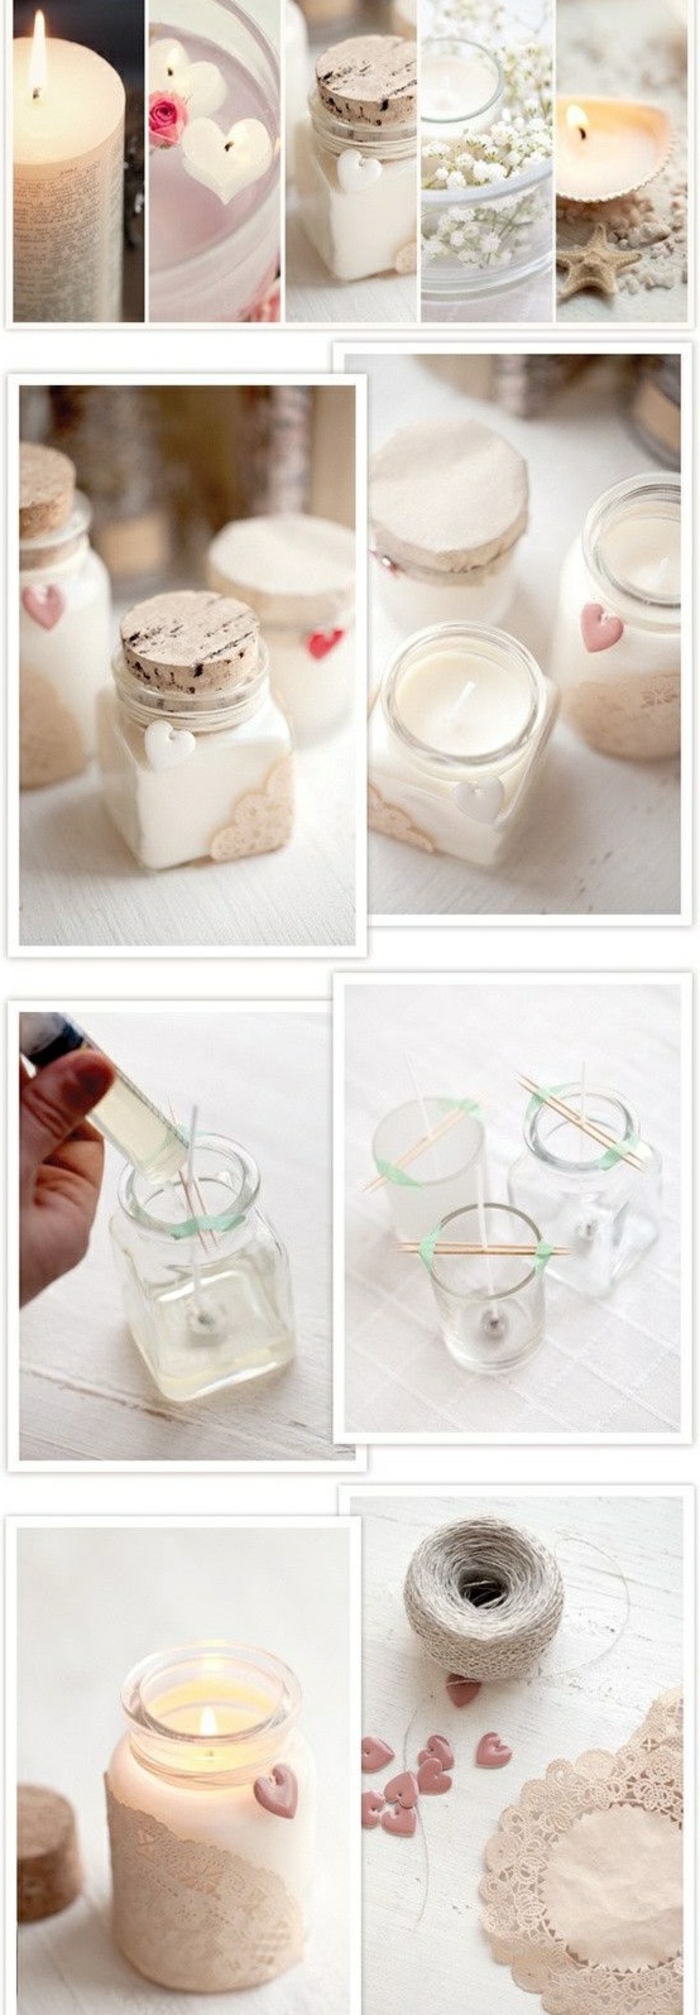 mason jars, filled with candle wax, make your own candles, decorated with hearts, baby's breath